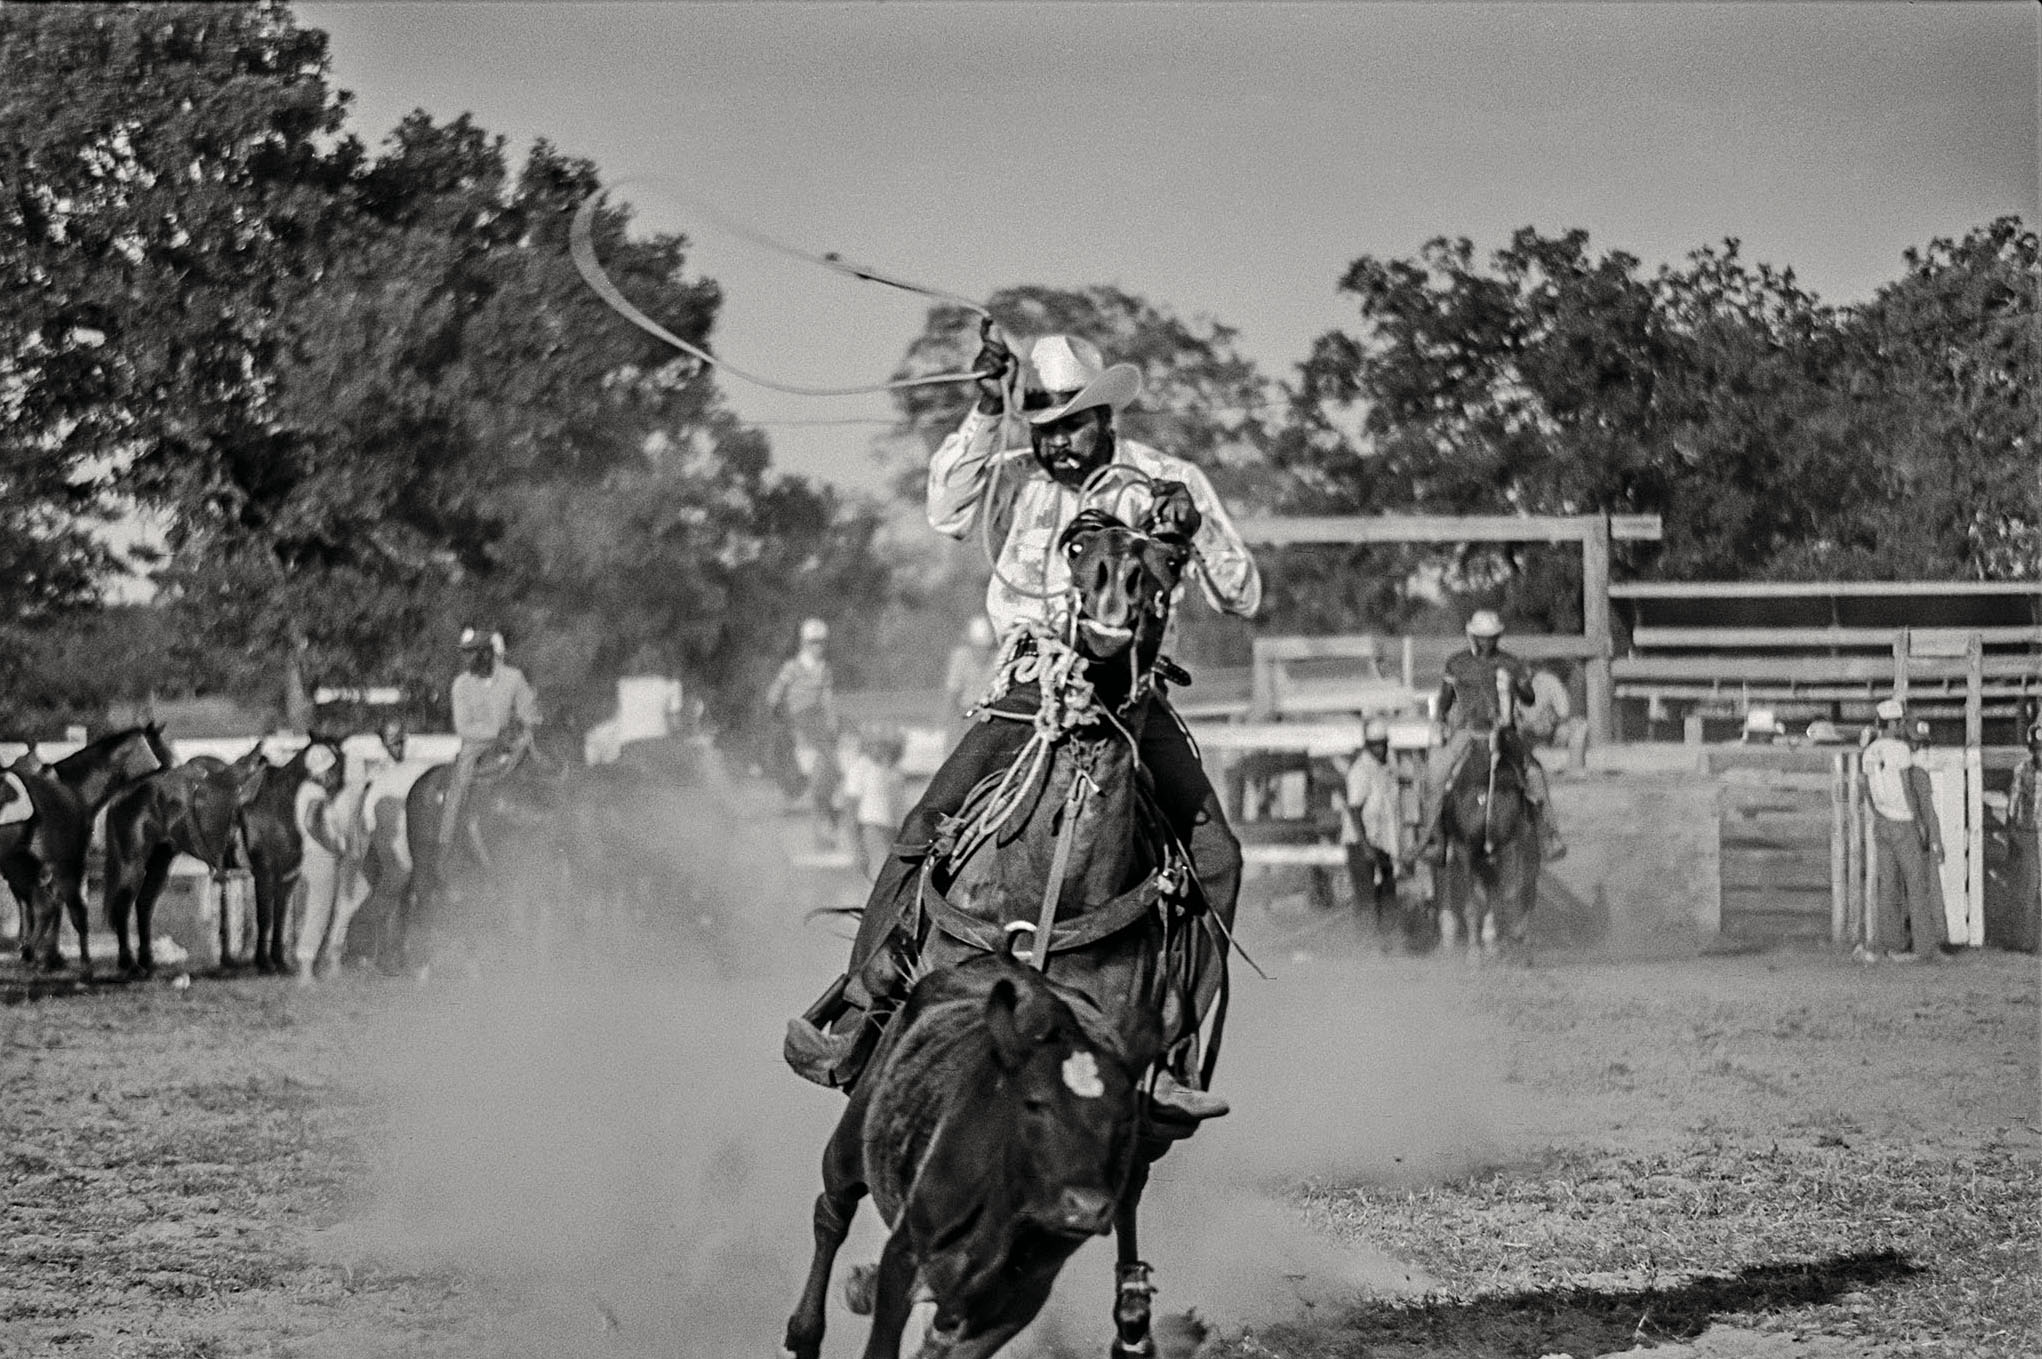 A man riding a horse spins a rope lasso above his head